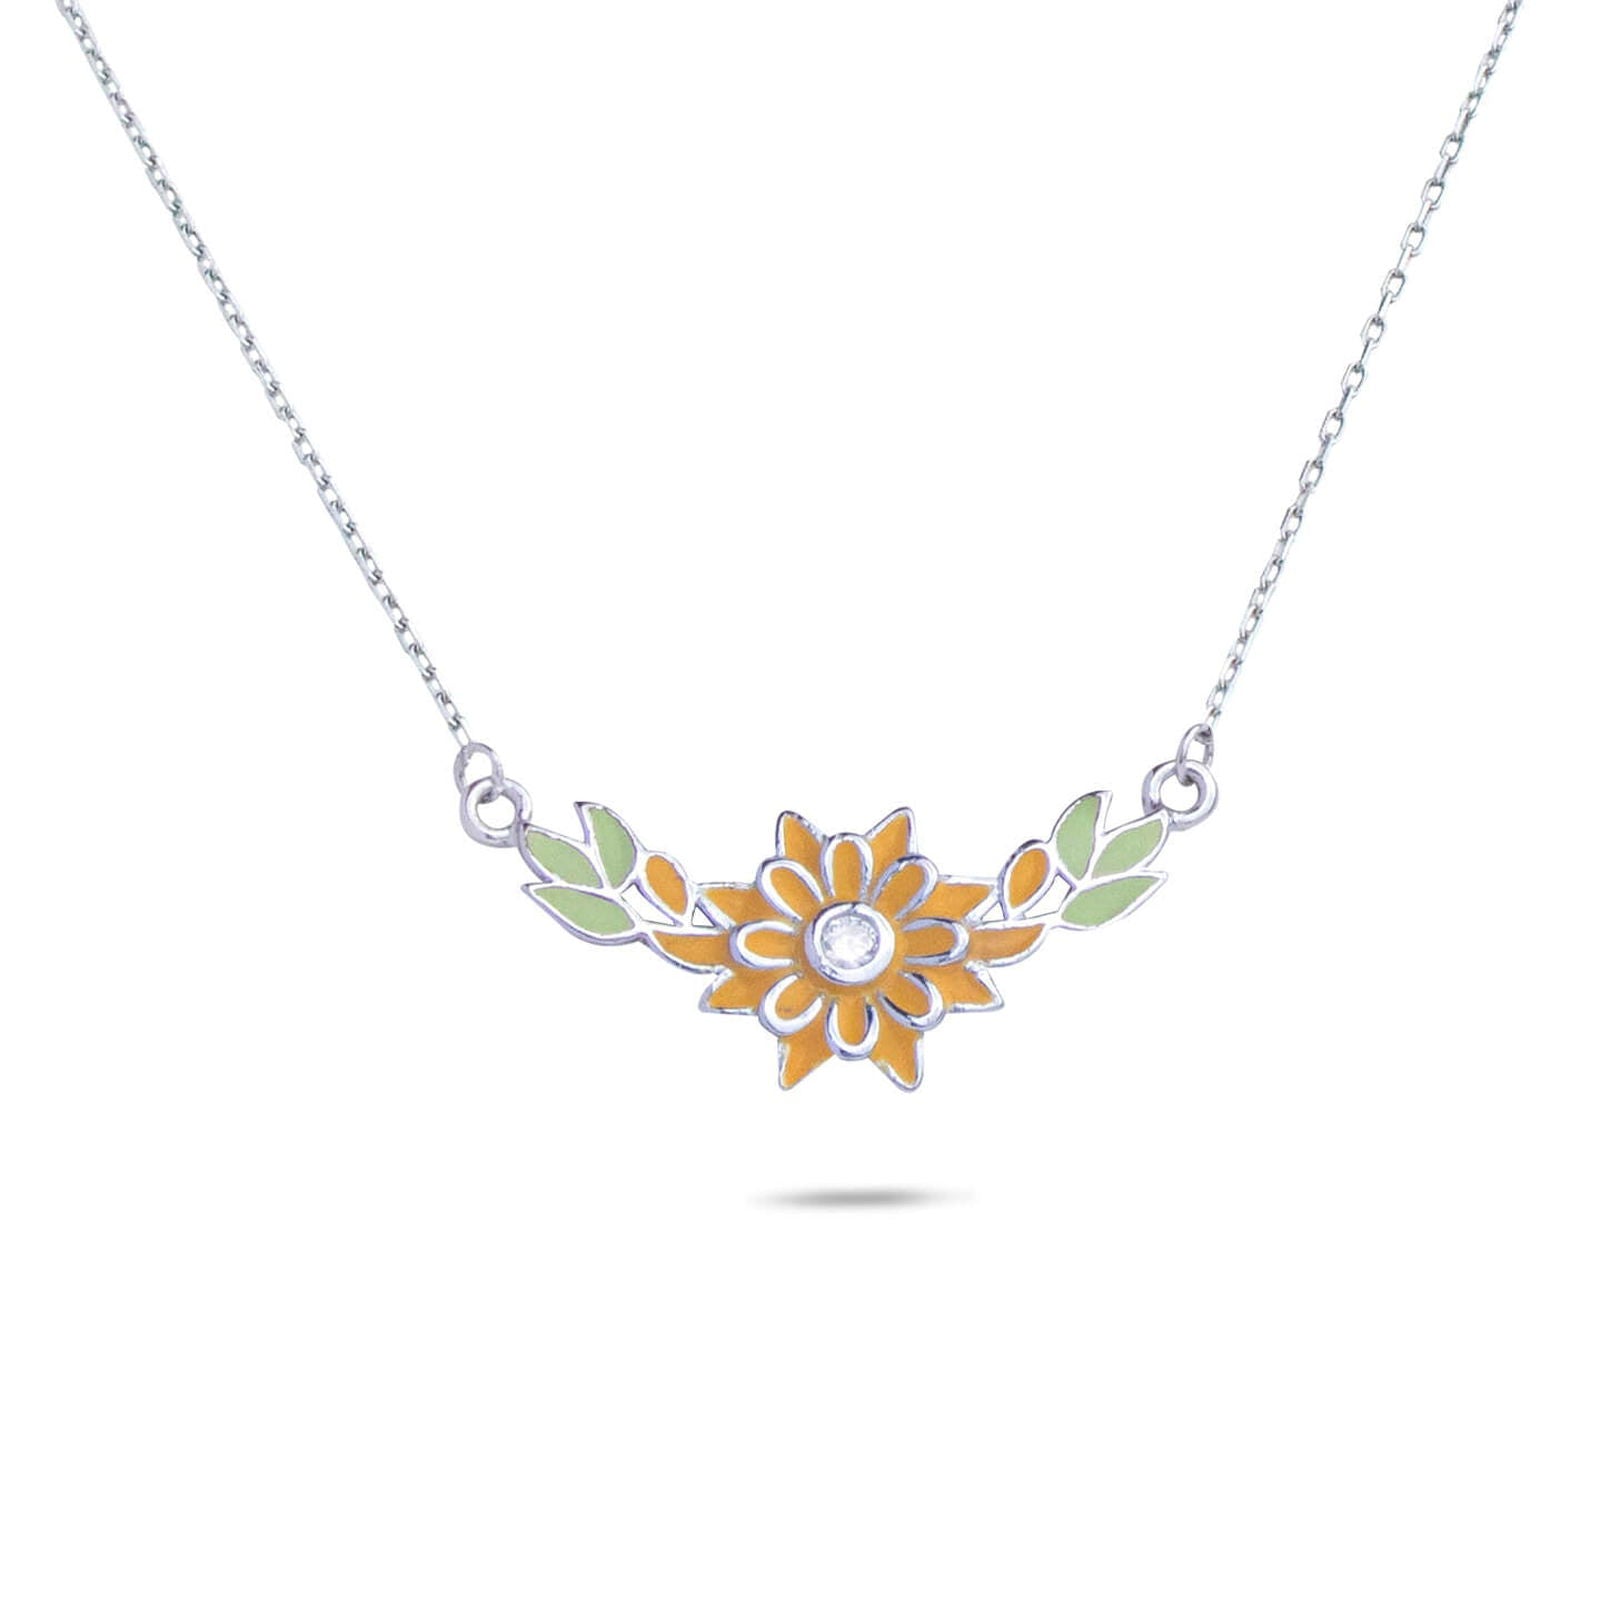 RRJ0187 Pure 925 Sterling Silver Necklace - RishiRich Jewels